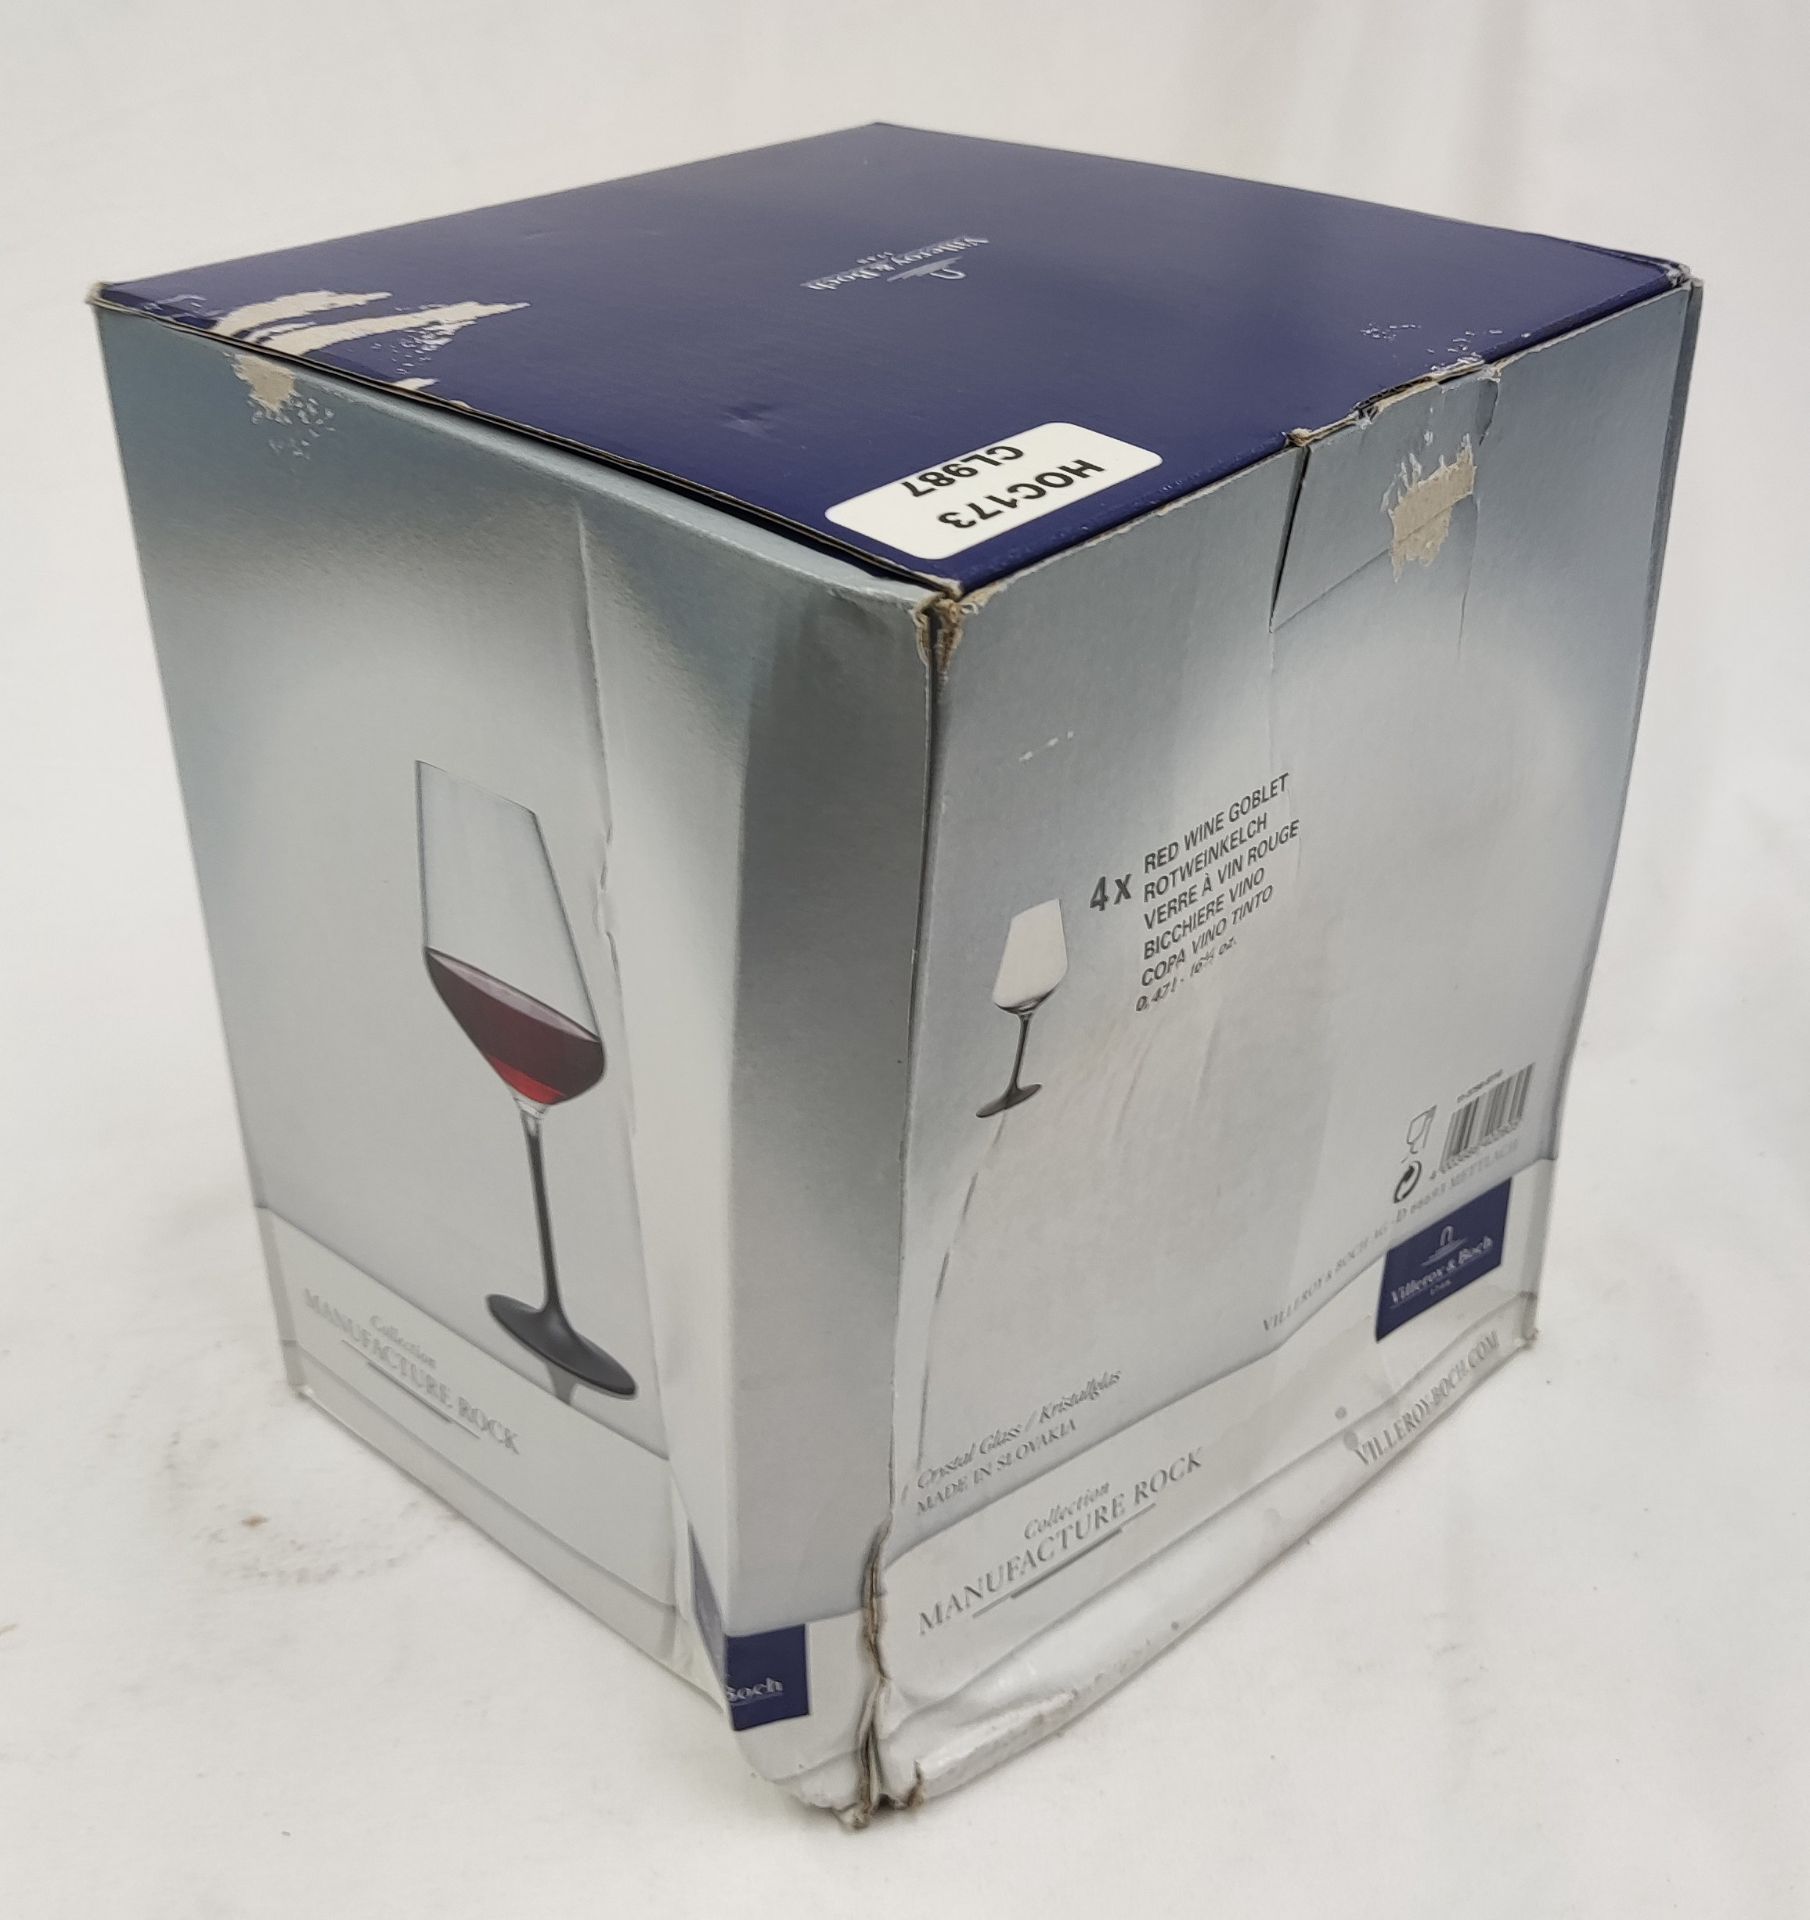 1 x VILLEROY & BOCH Manufacture Rock Red Wine Goblet Set, 4 Piece - New And Boxed - RRP £66 - Ref: - Image 10 of 12